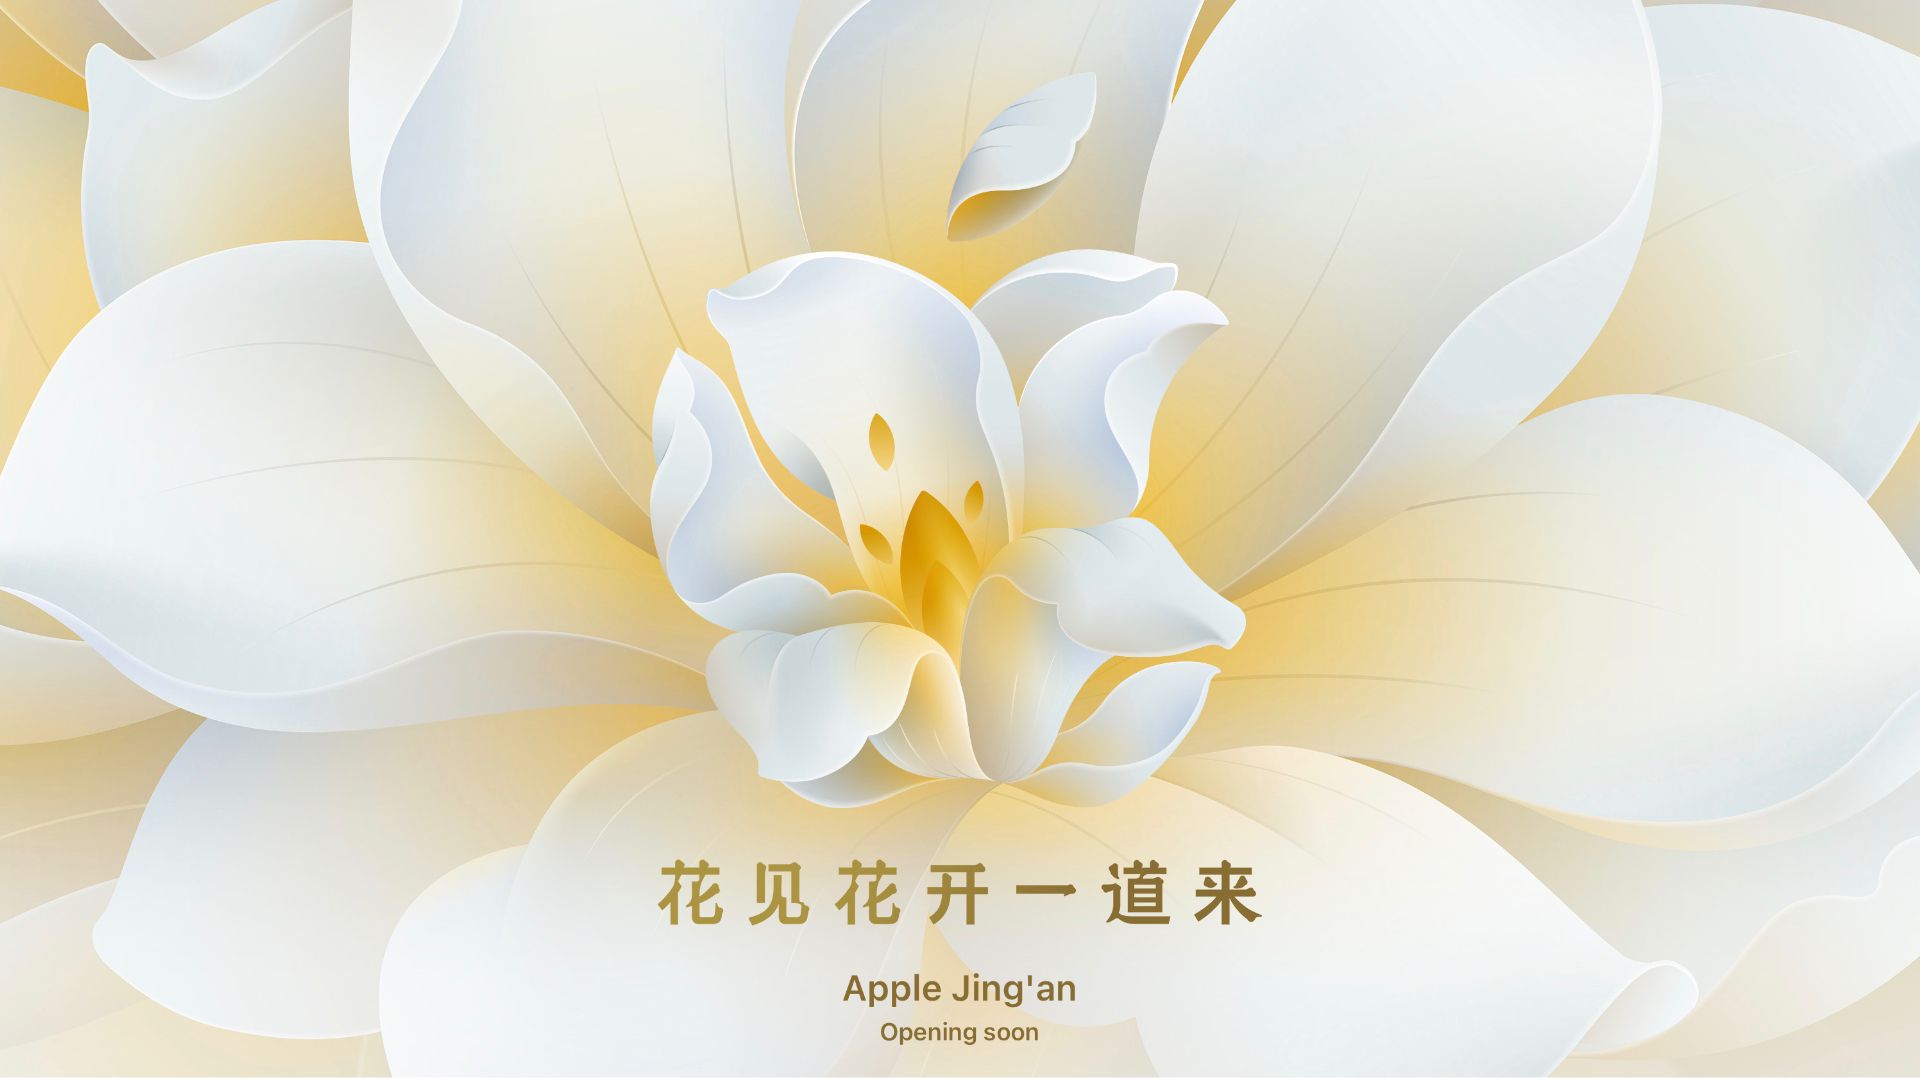 Apple's Eighth Retail Store in Shanghai Expected to Open This Month